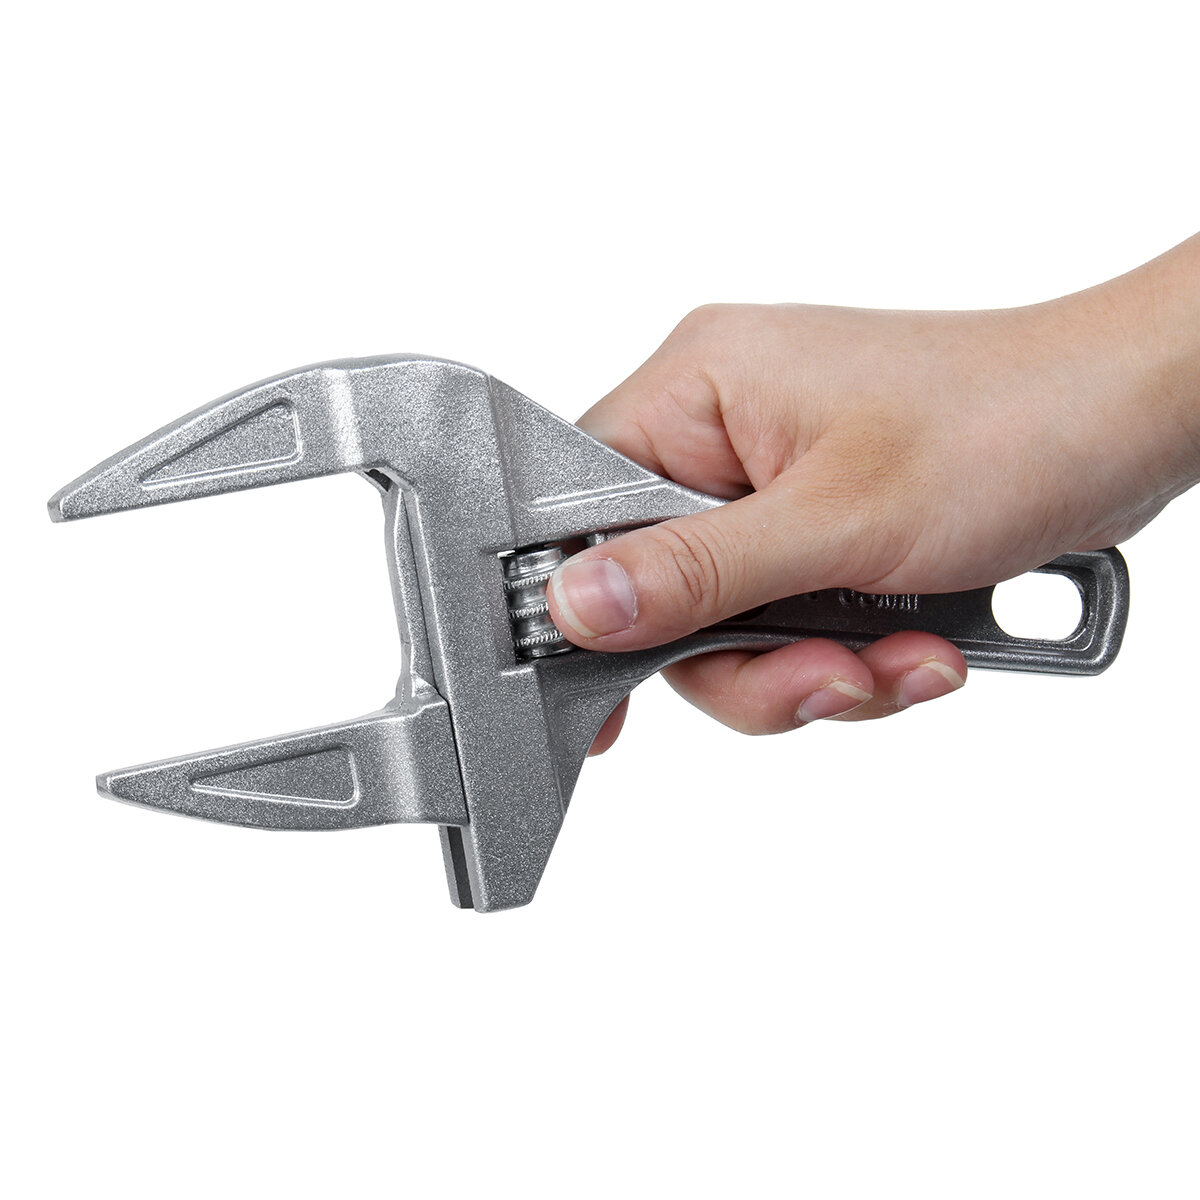 Adjustable Spanner Wrench Tool Wide Jaw Large Hand Nut Opening 16-68MM Steel Key 